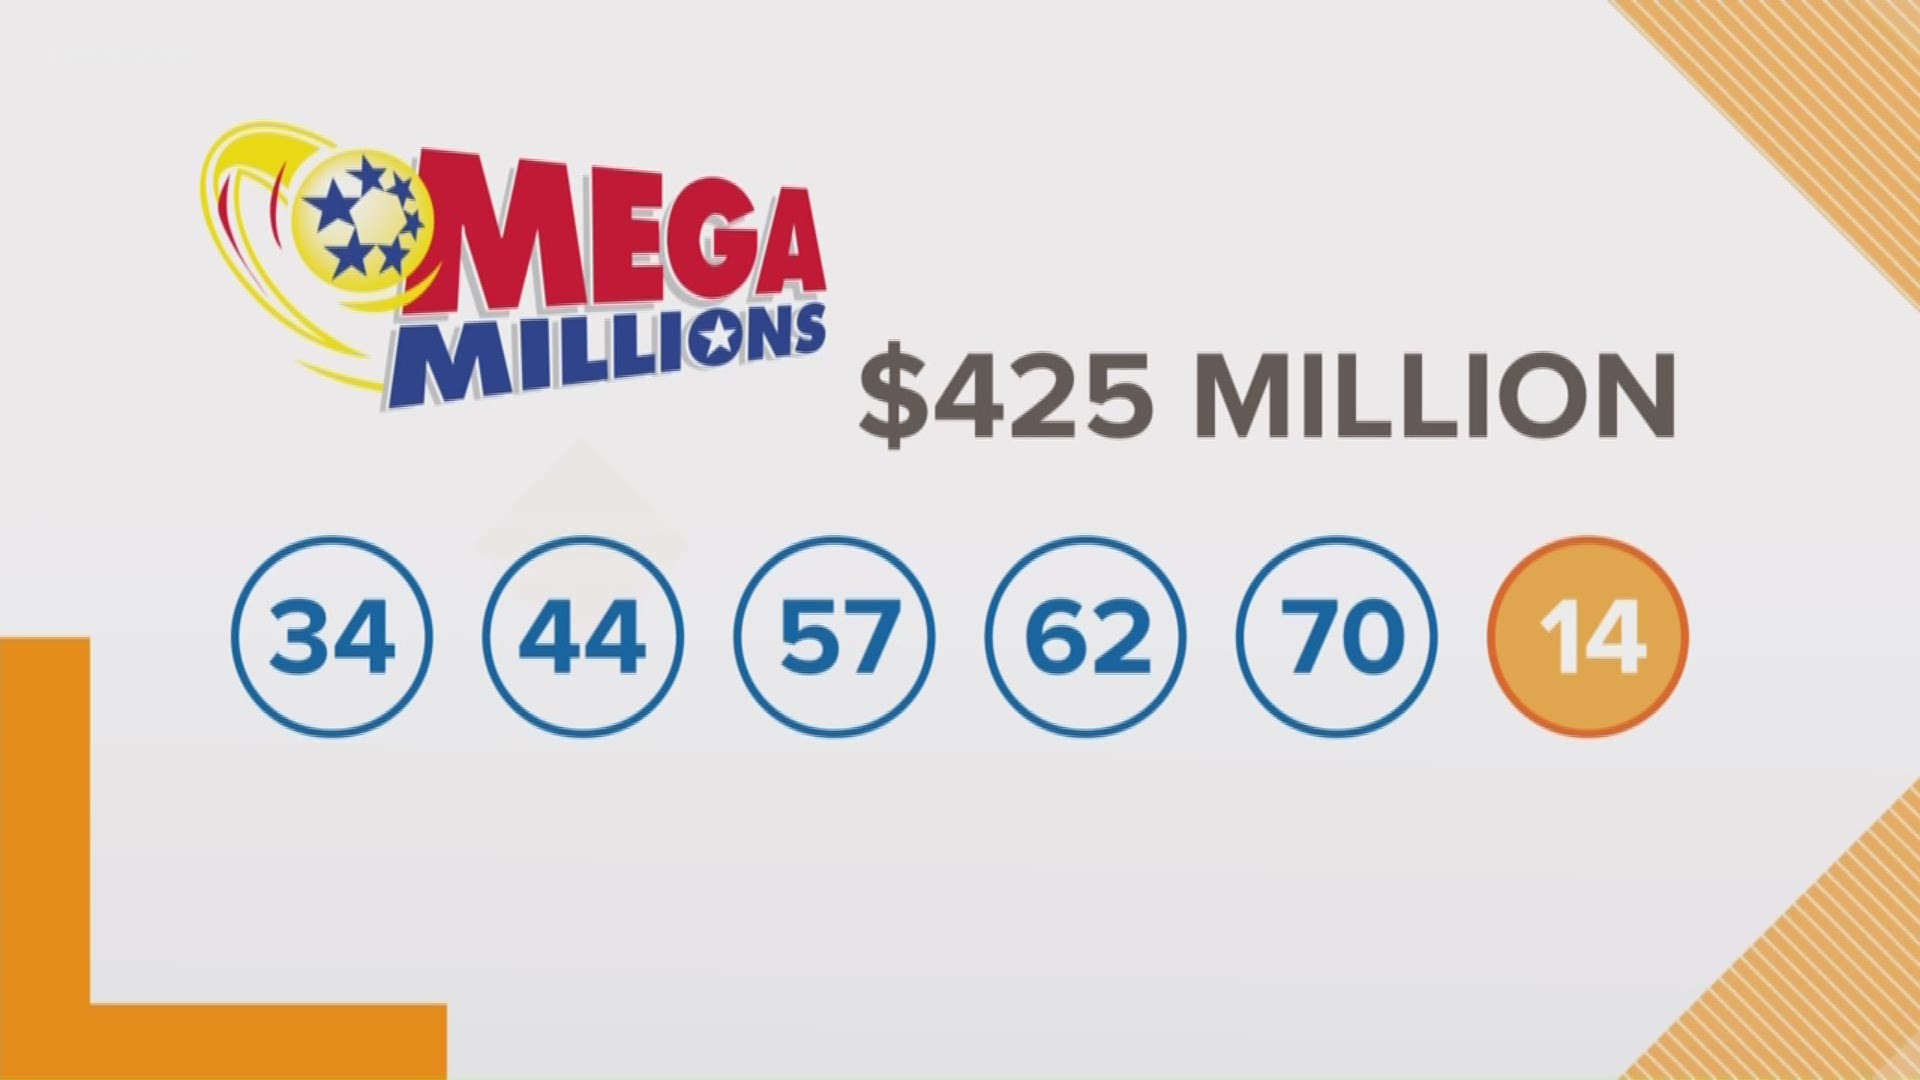 Someone's 2019 got off to a very happy start thanks to a $425 jackpot win in Tuesday's Mega Millions drawing.